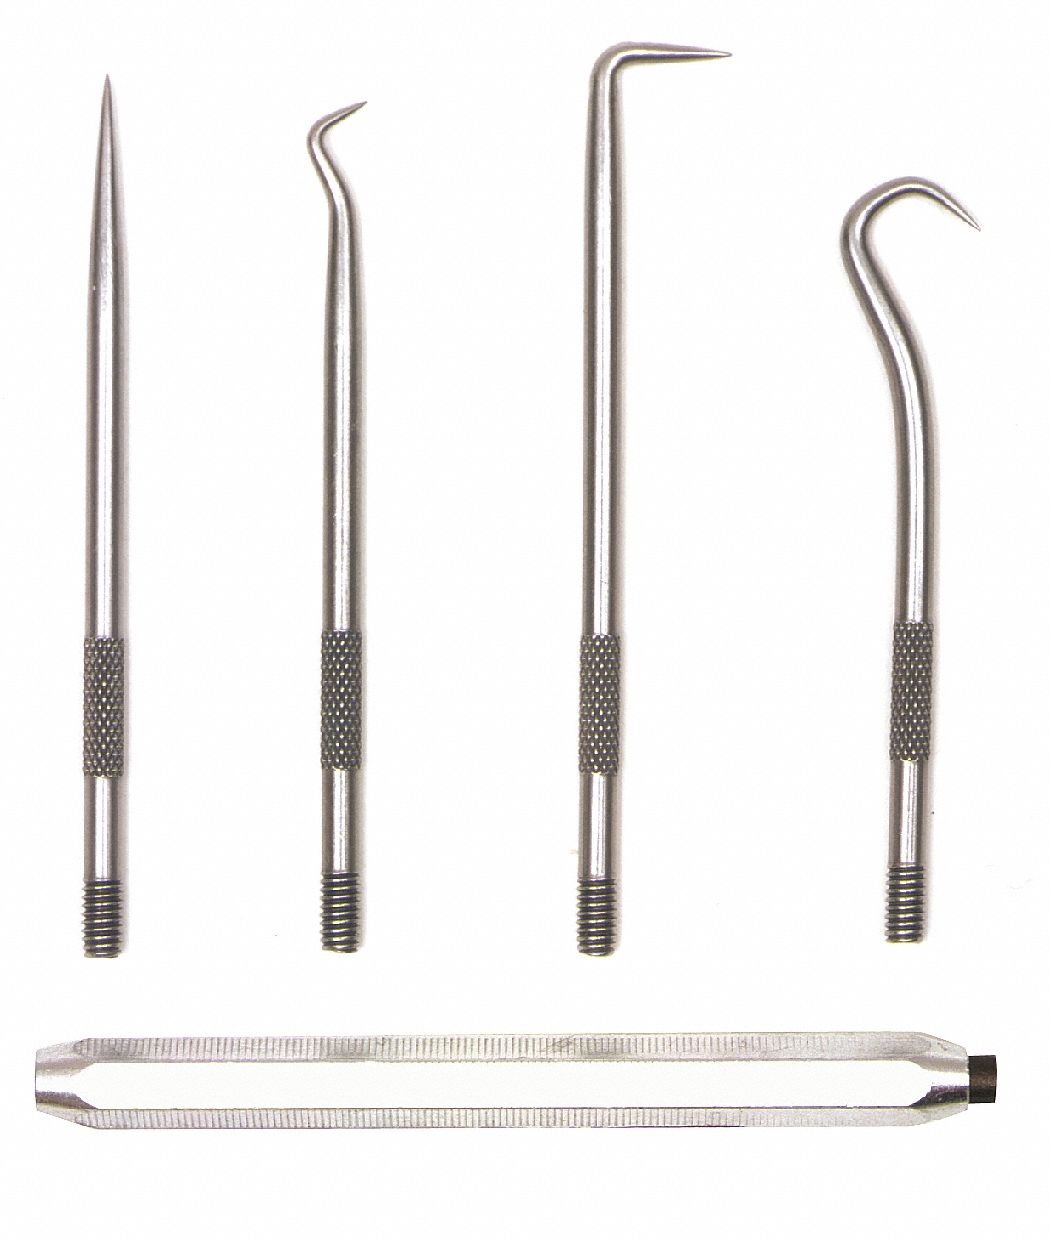 The Best Hook and Pick Set?